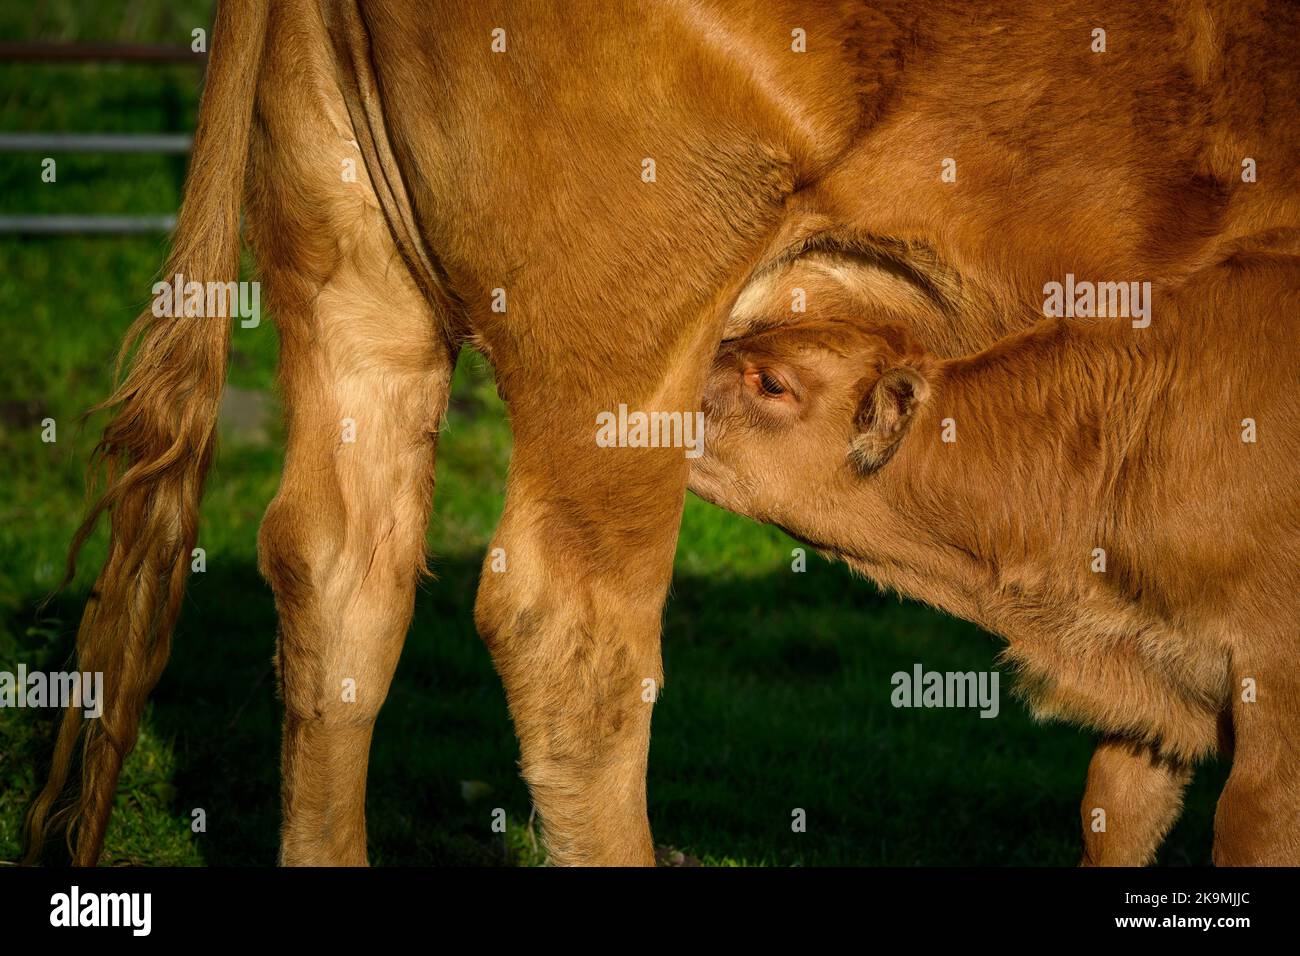 Sunlit brown cow & small cute newborn calf standing outside in farm field (hungry thirsty youngster, mother's milk, close-up) - Yorkshire England, UK. Stock Photo